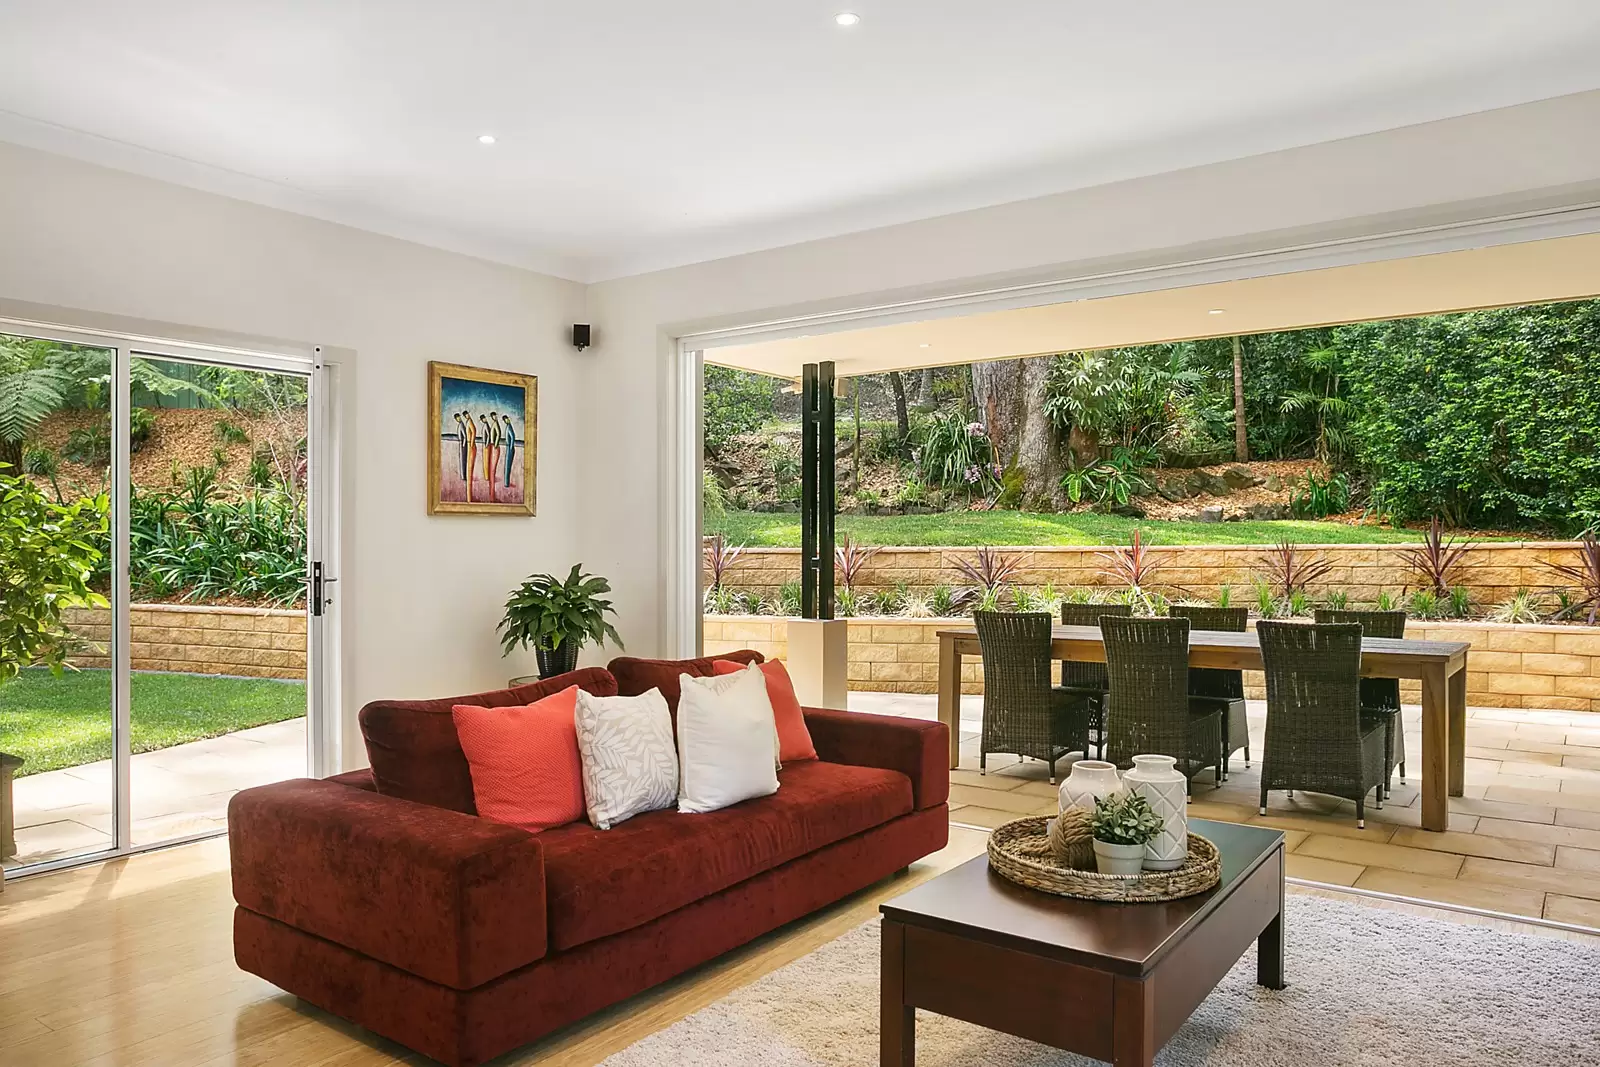 Photo #5: 14 Albion Avenue, Pymble - Sold by Sydney Sotheby's International Realty